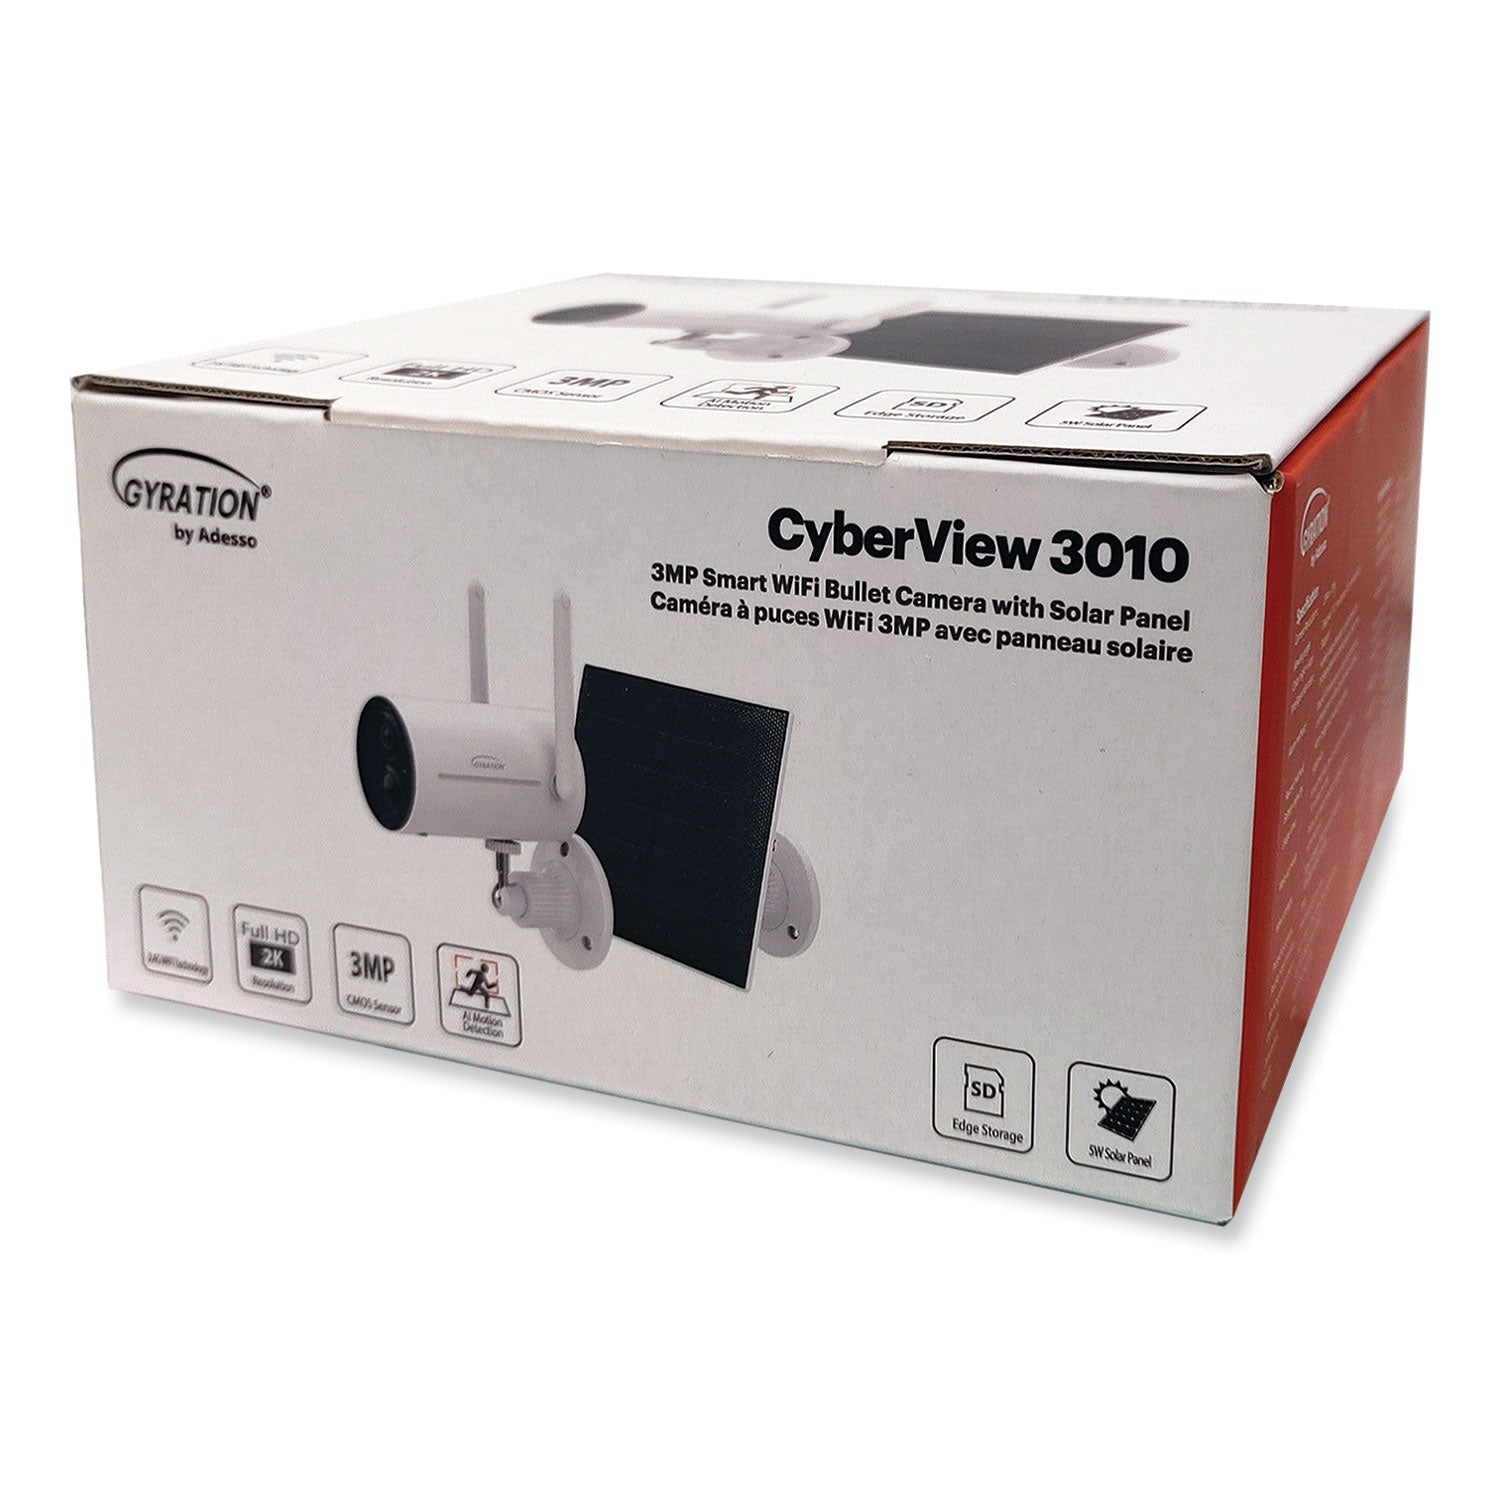 cyberview-3010-3mp-smart-wifi-bullet-camera-with-solar-panel-2304-x-1296-pixels_adecybrview3010 - 1